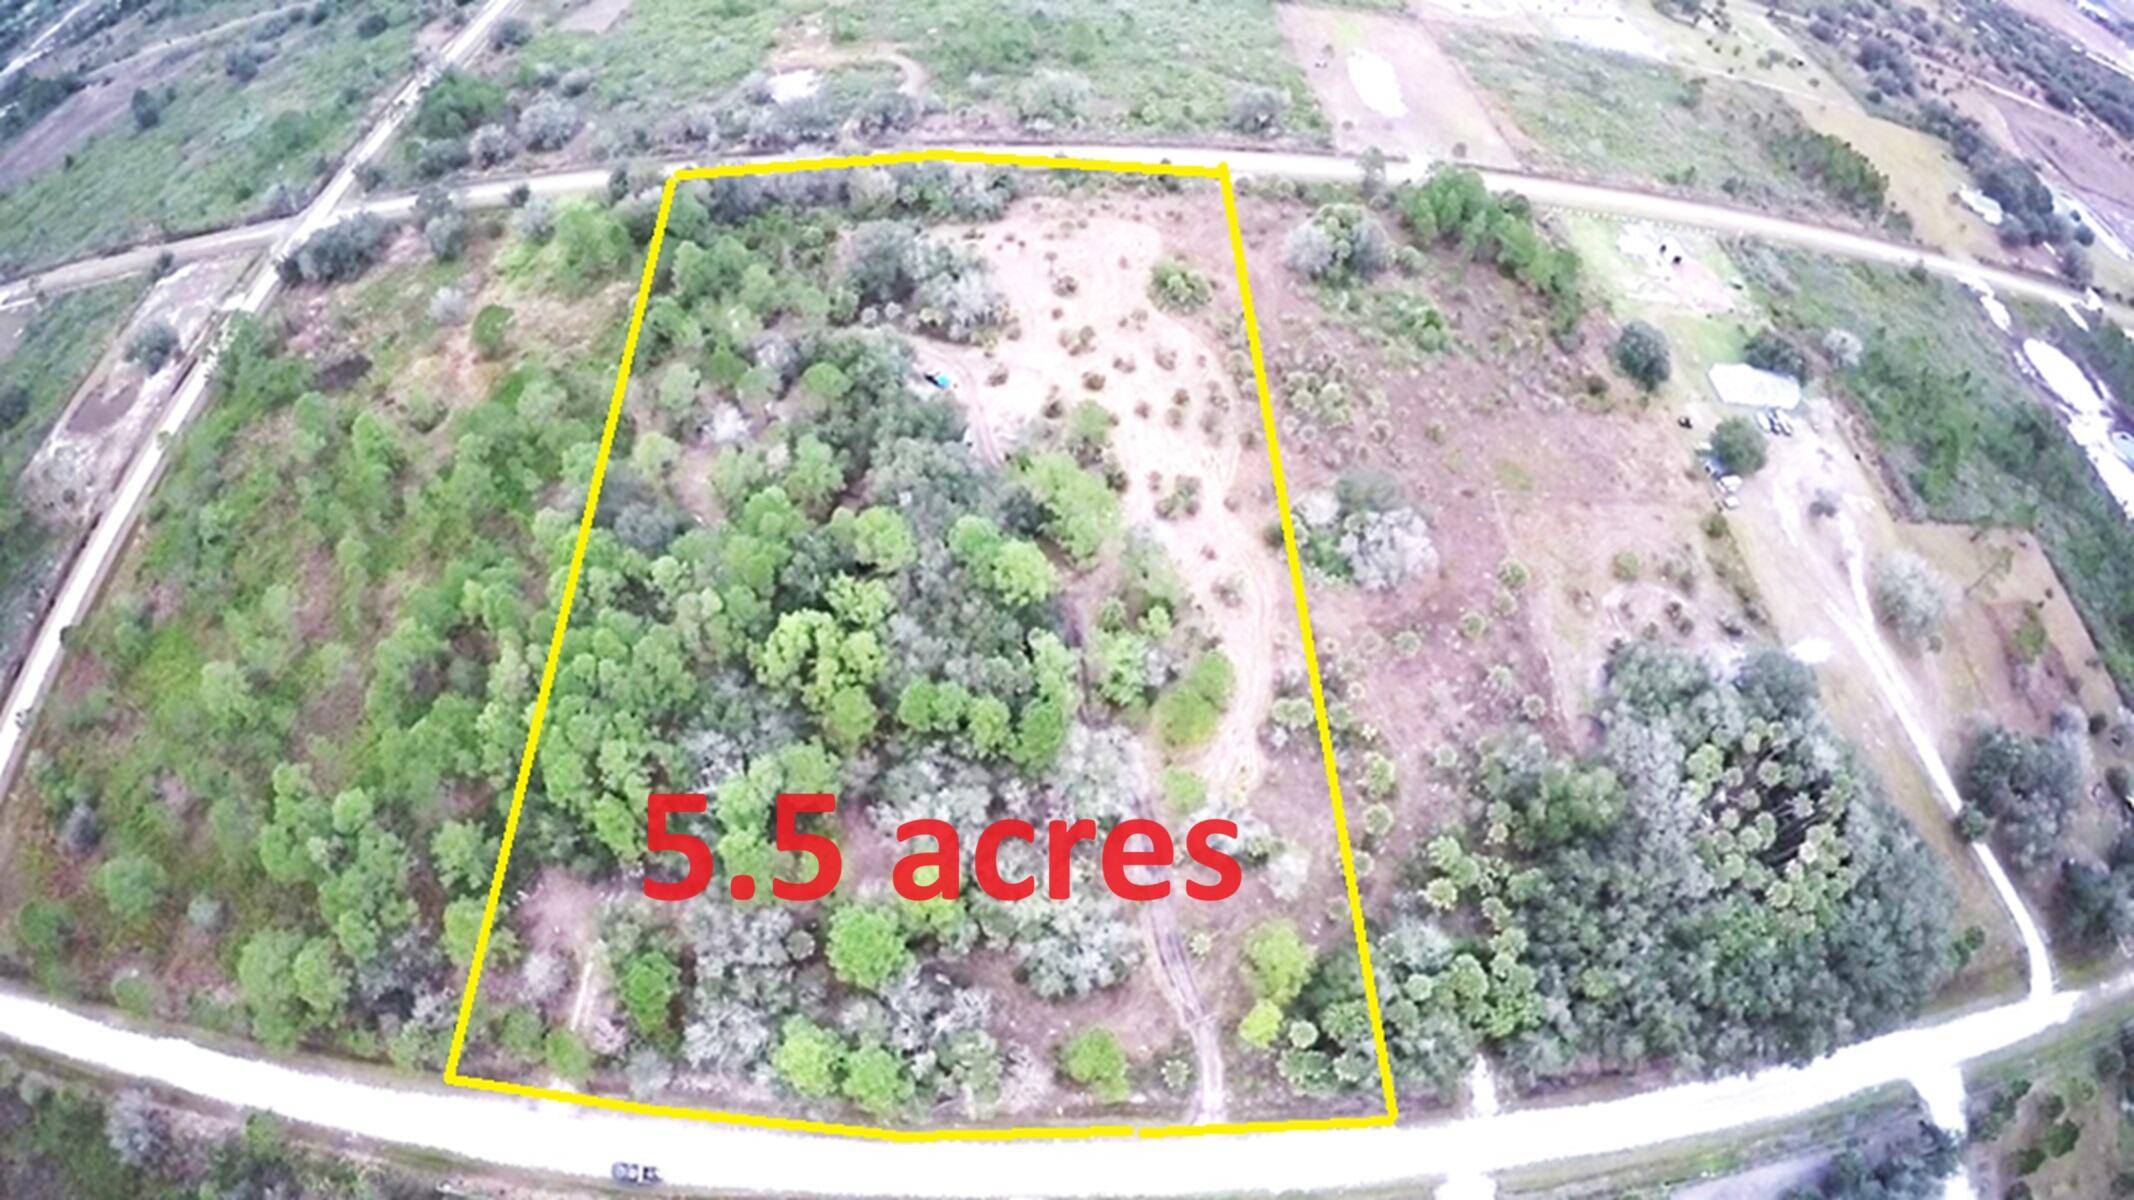 5. 5 acres vacant land with improvements.